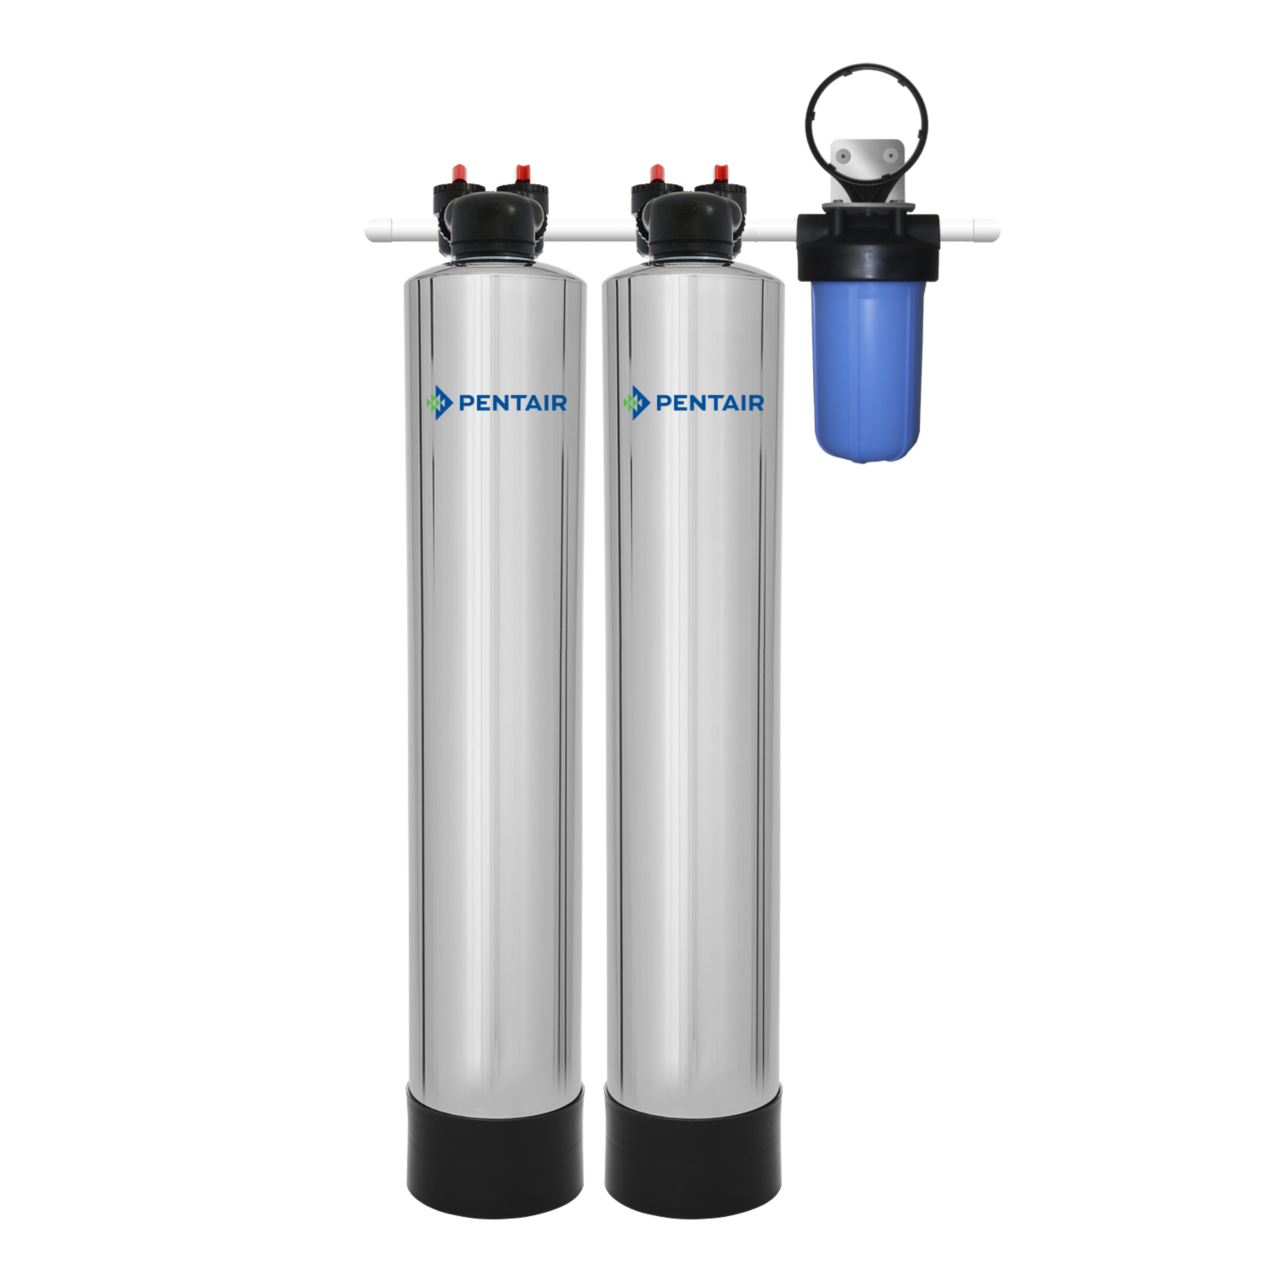 EXPRT MR-3030 Whole House Water Filter 3 Stage Water Purifier, GAC & KDF 85